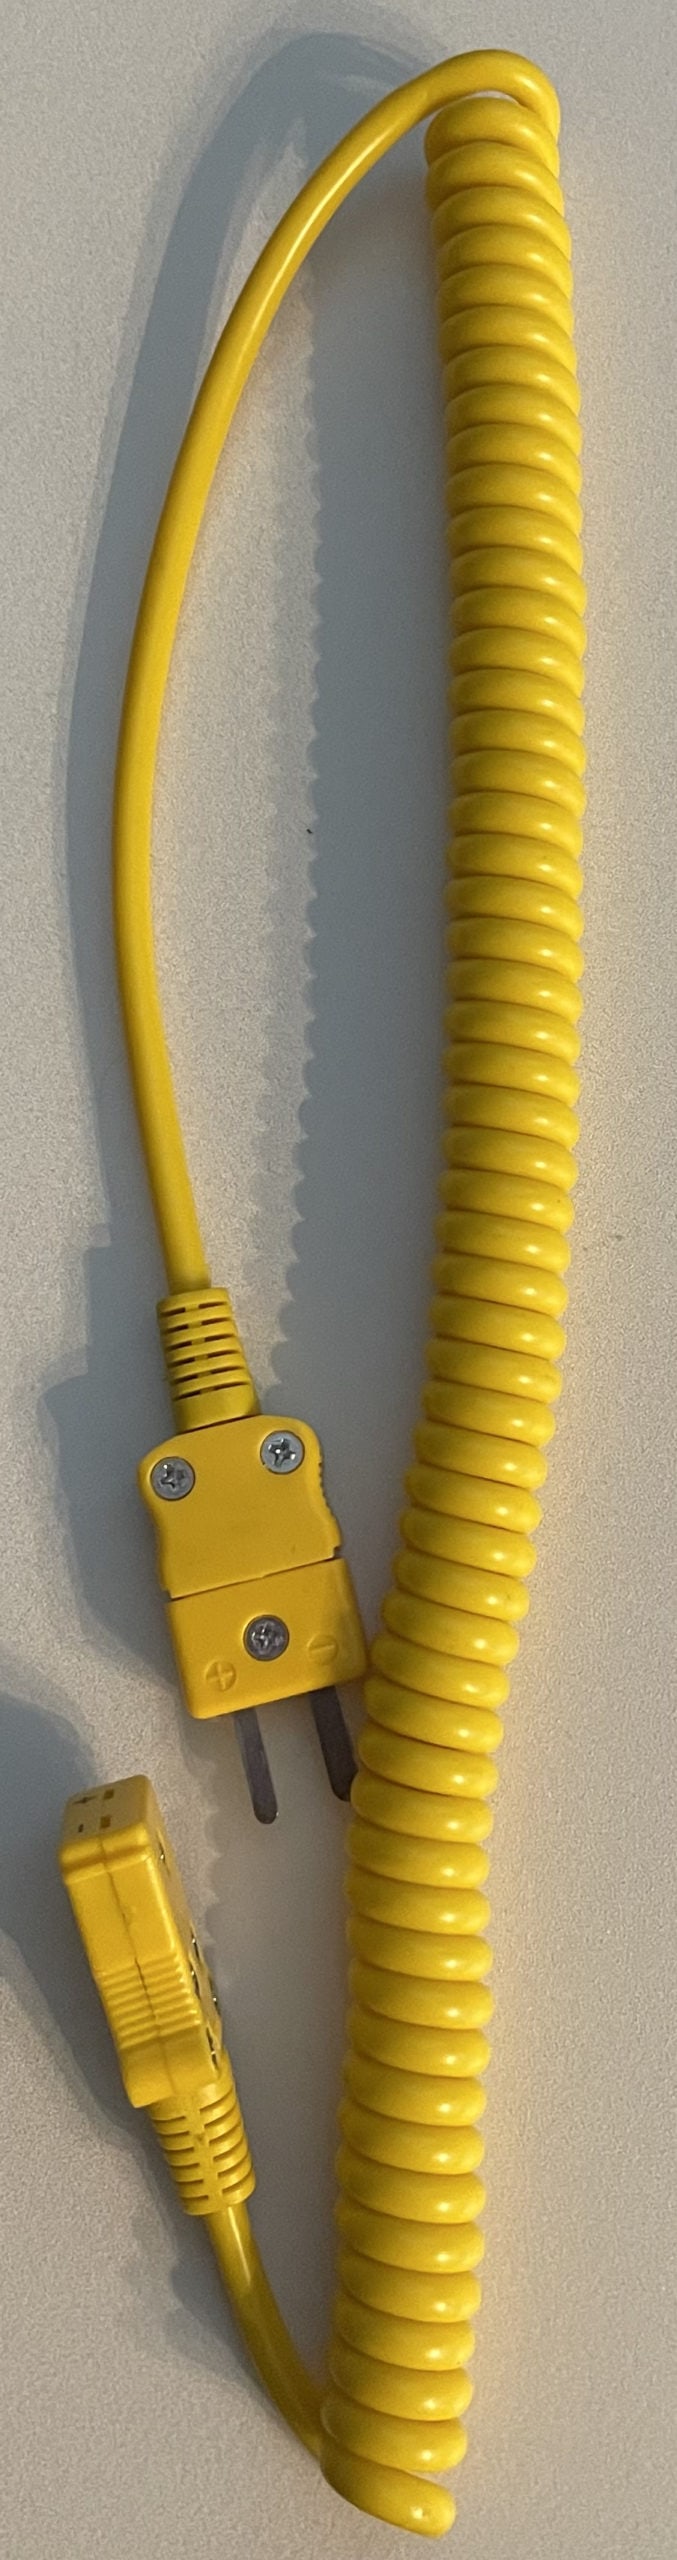 Extension Cable for K type Sub-Mini Probes